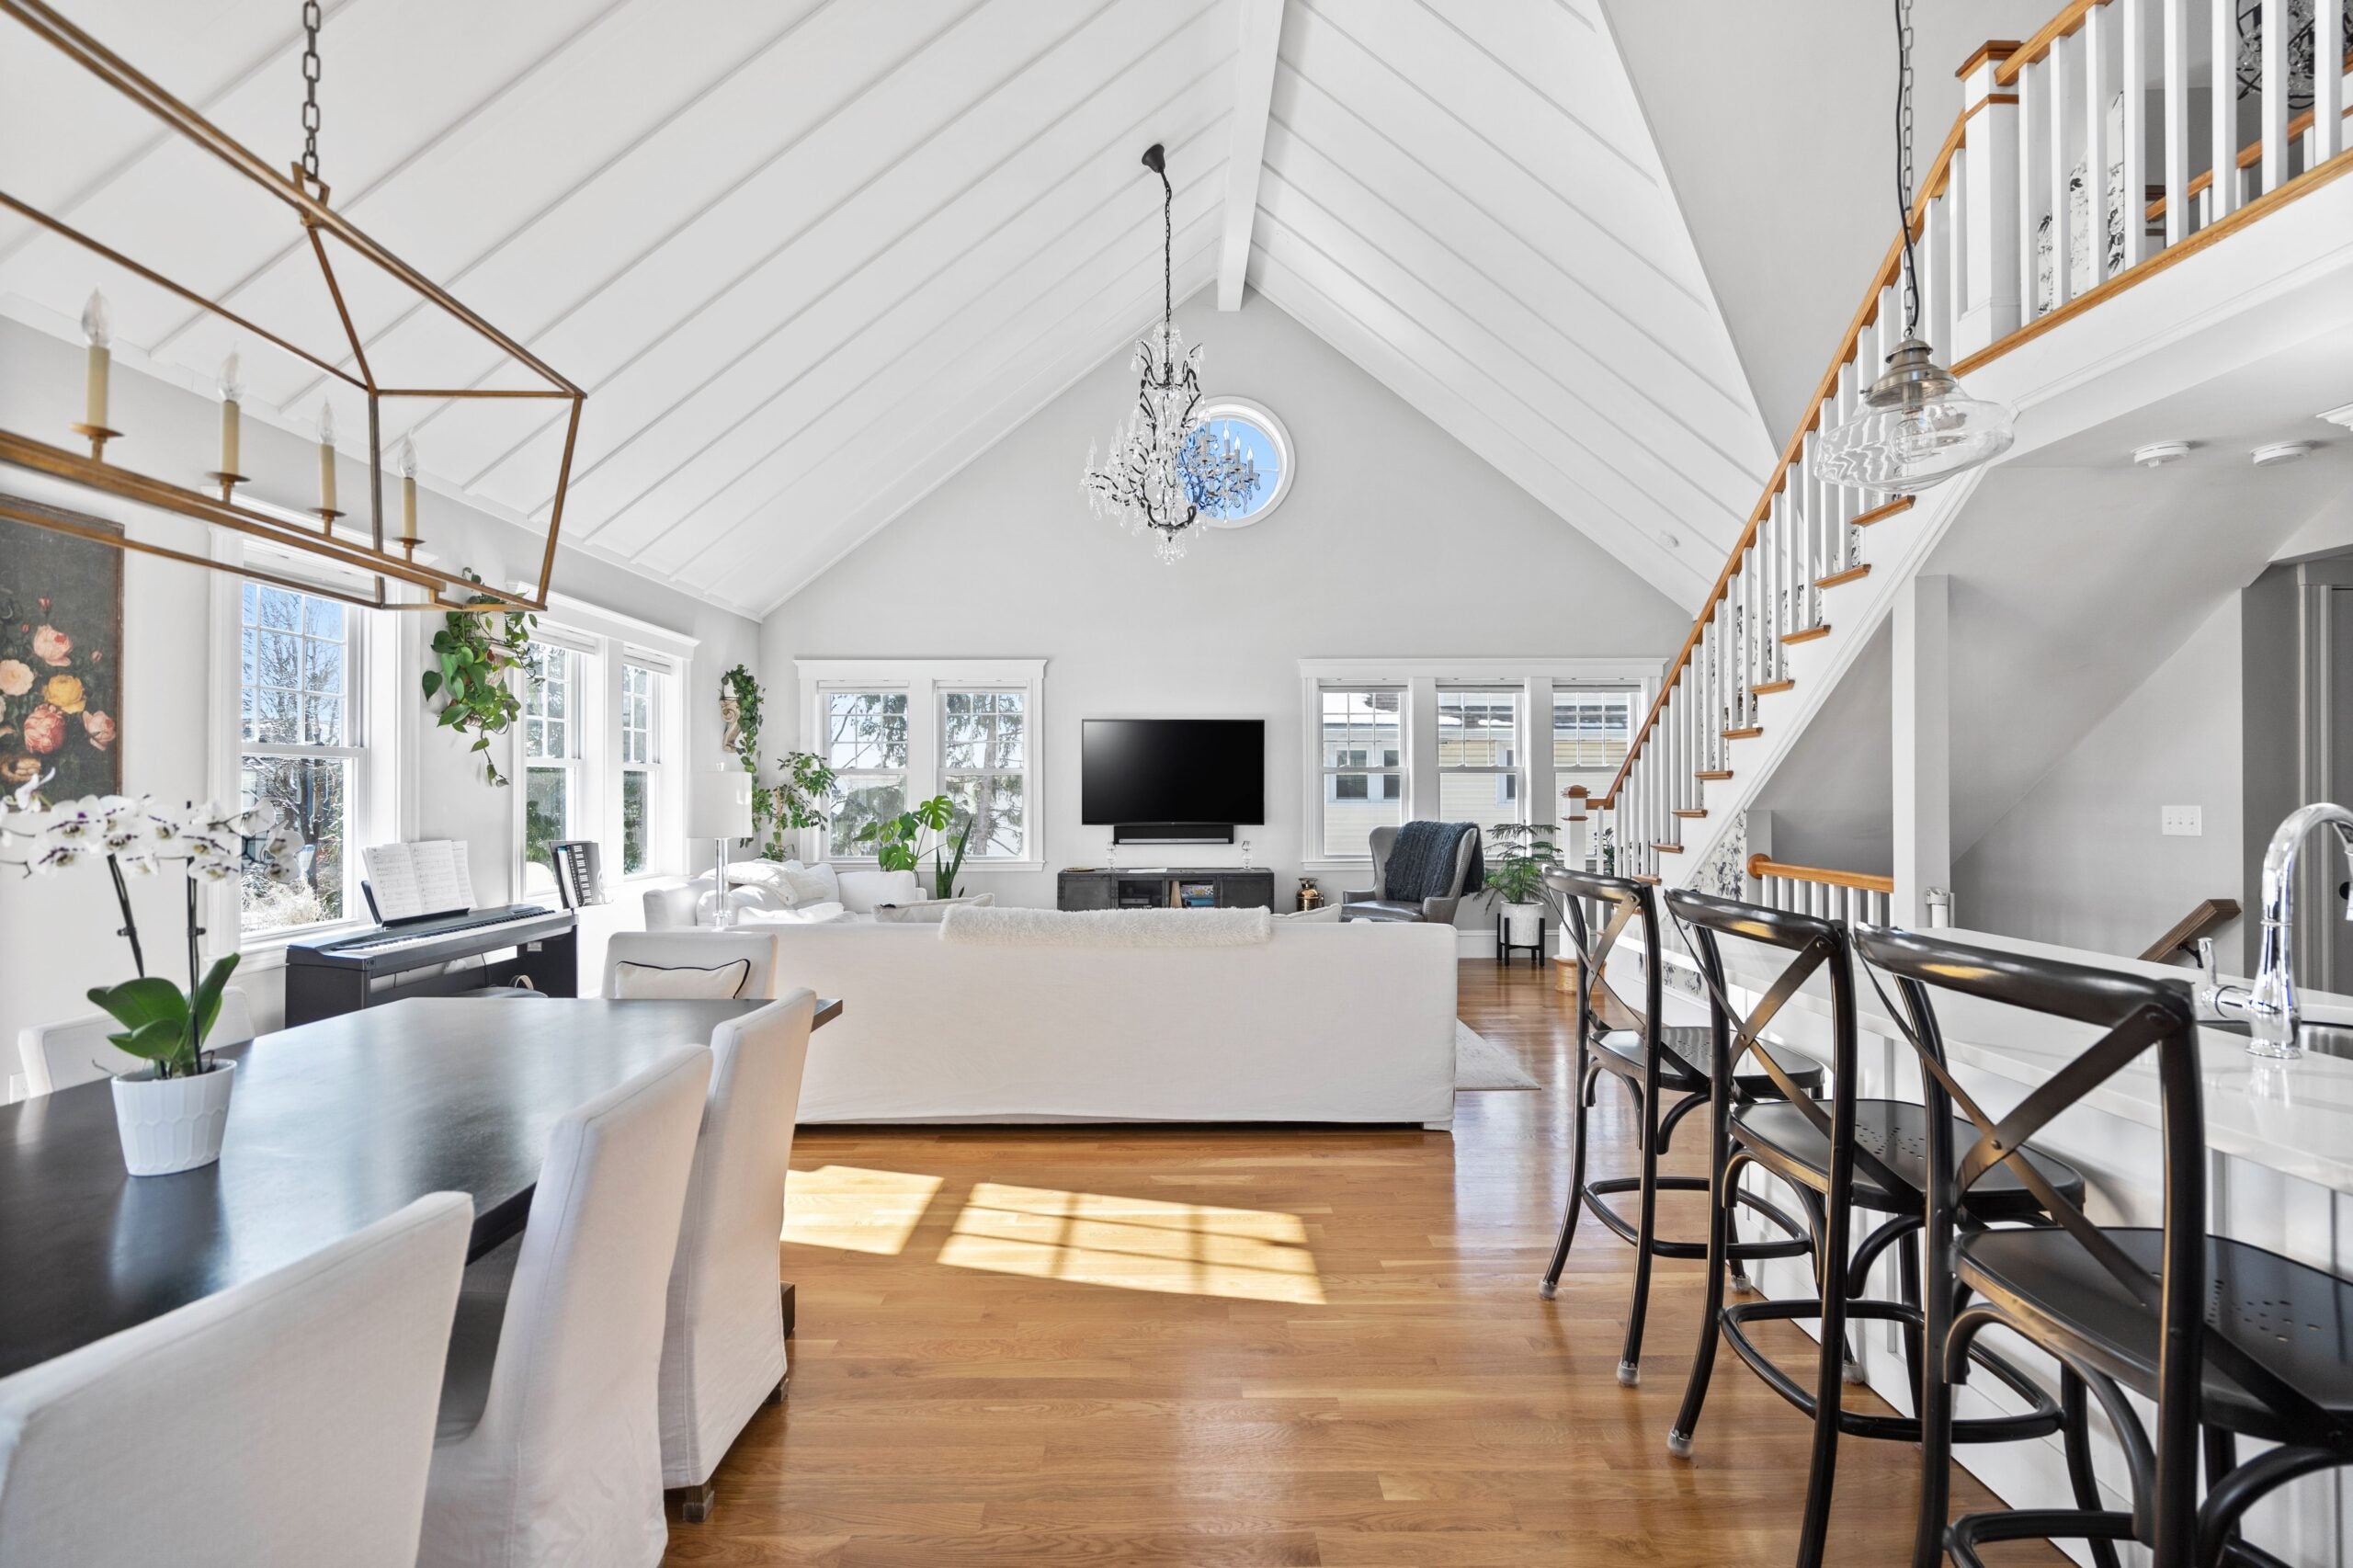 A long view from the dining area and kitchen island out toward the living area in the back. The walls are light-colored. The ceiling is white and clad in shiplap. An iron chandelier hangs from the ceiling of this Newton condo, our Home of the Week.